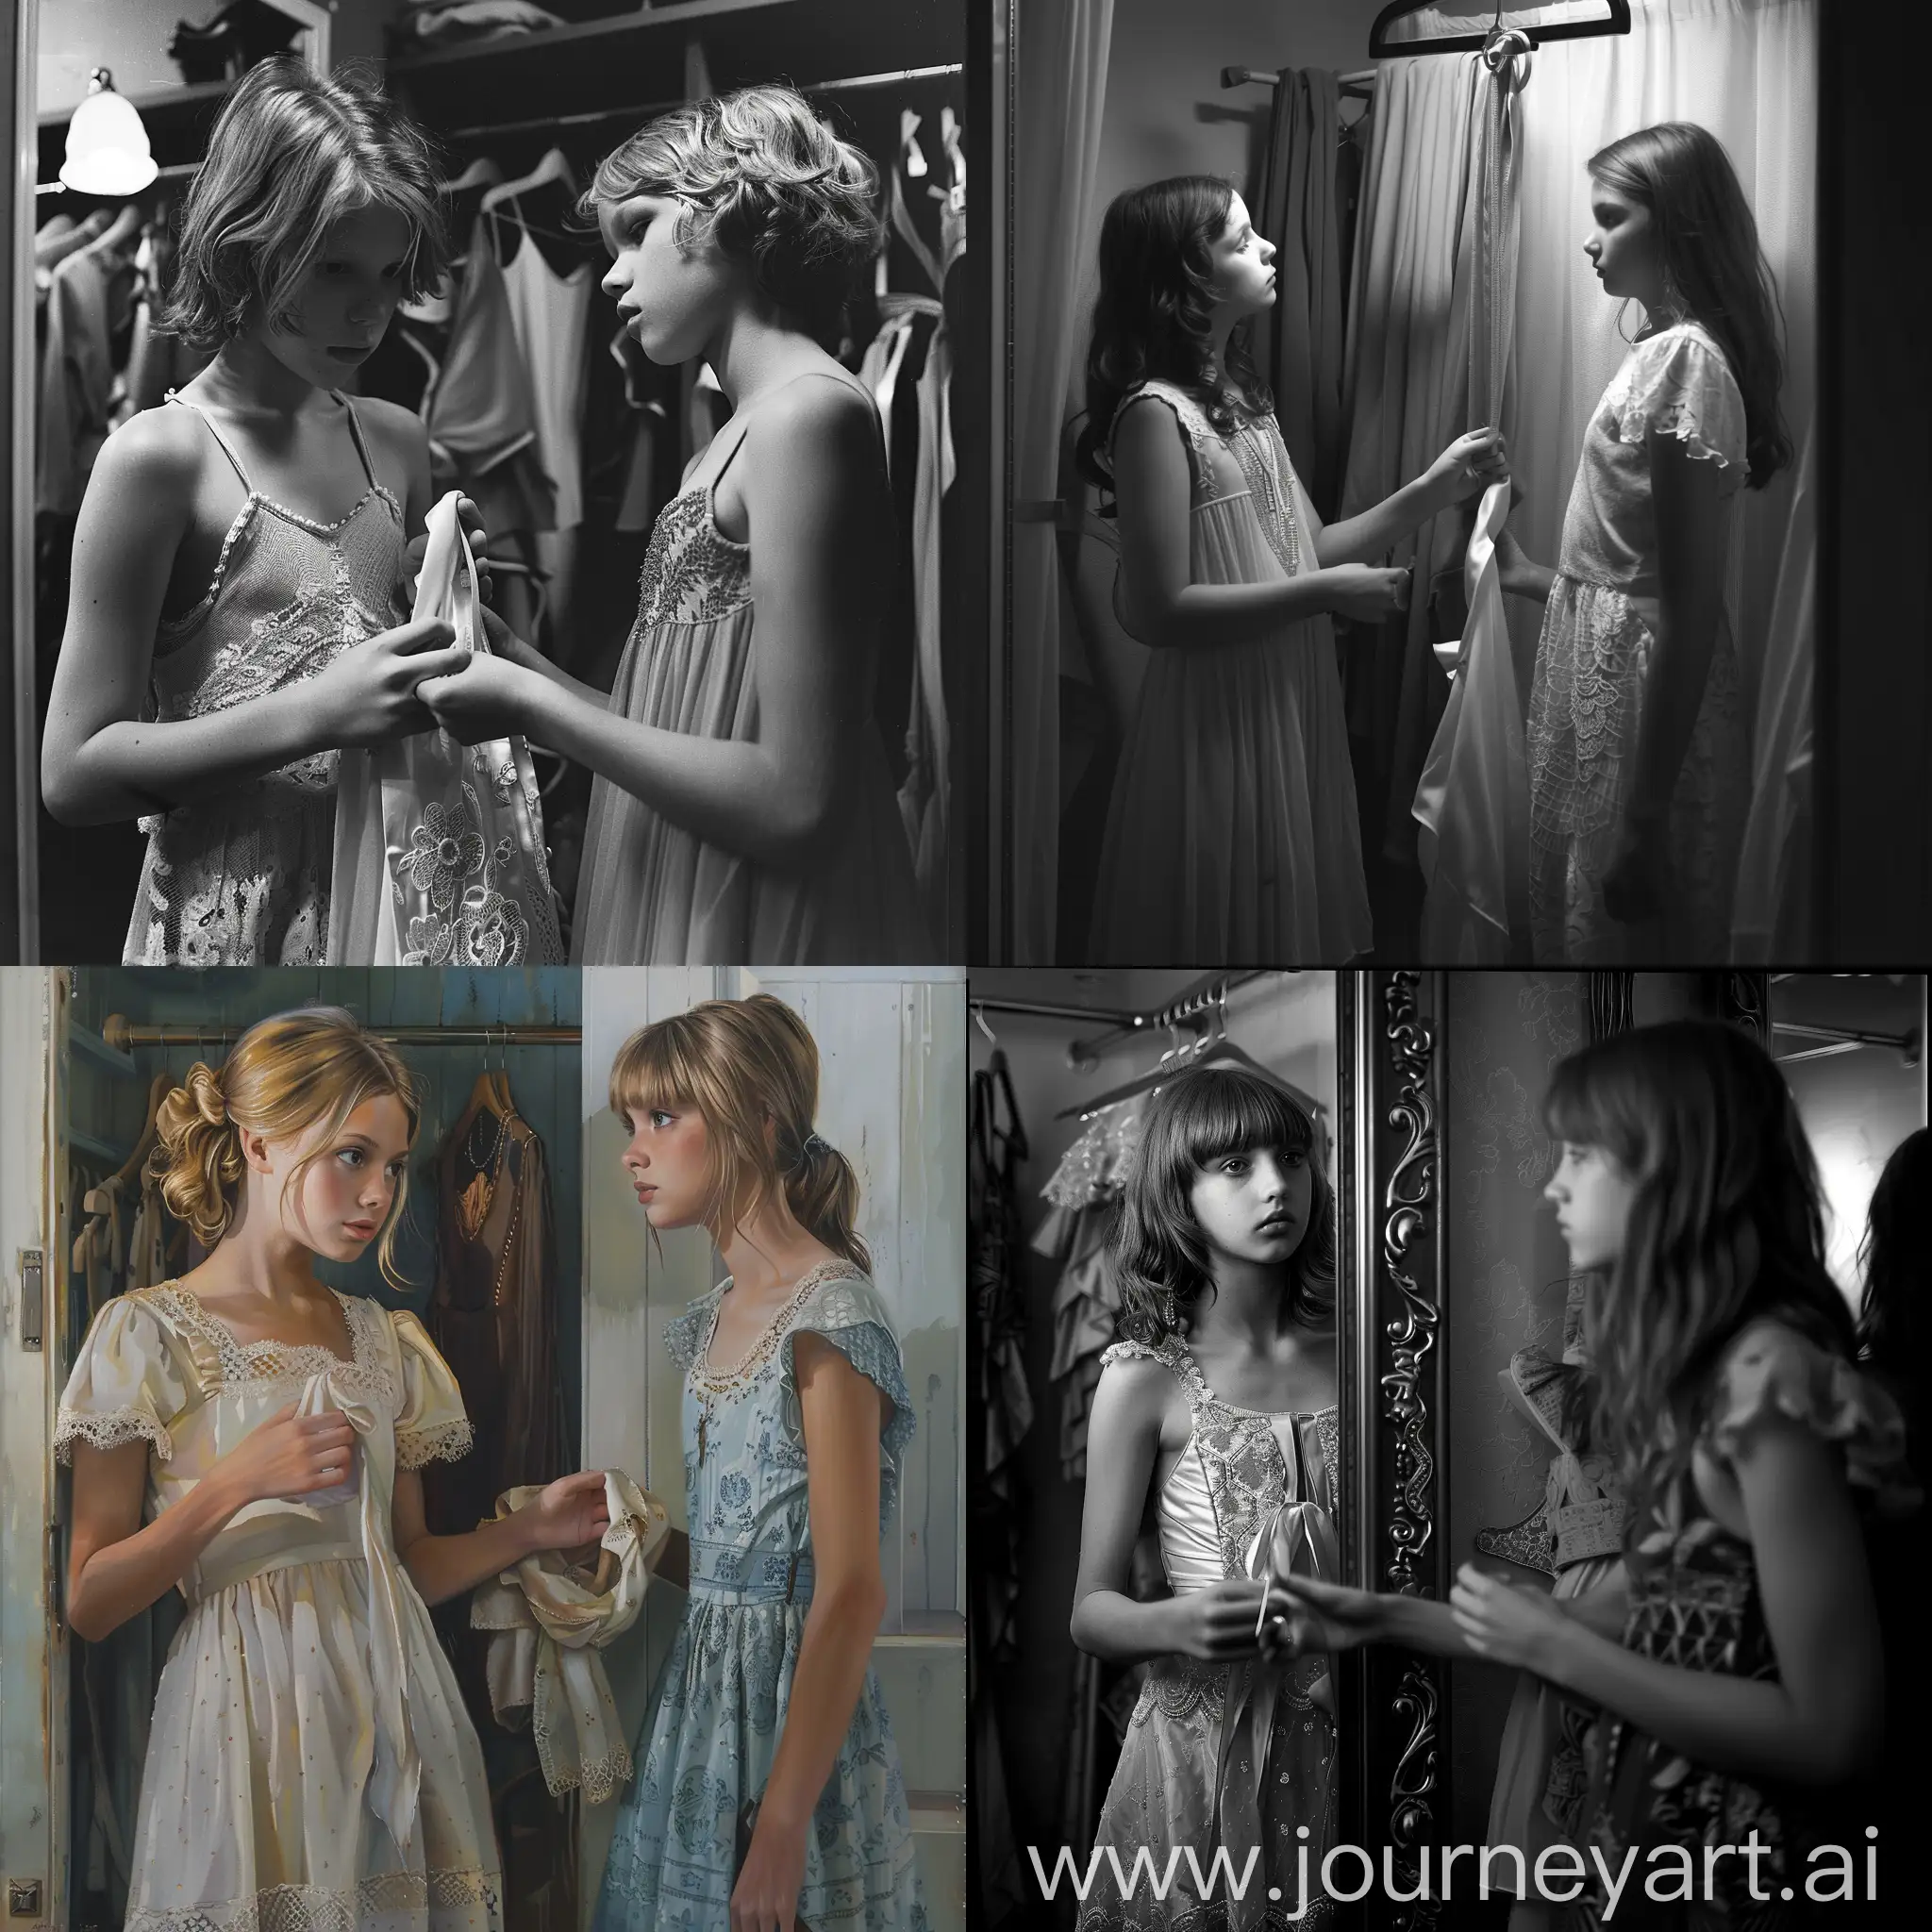 
inside the fitting room two young women, one holding a dress and the other looking at her